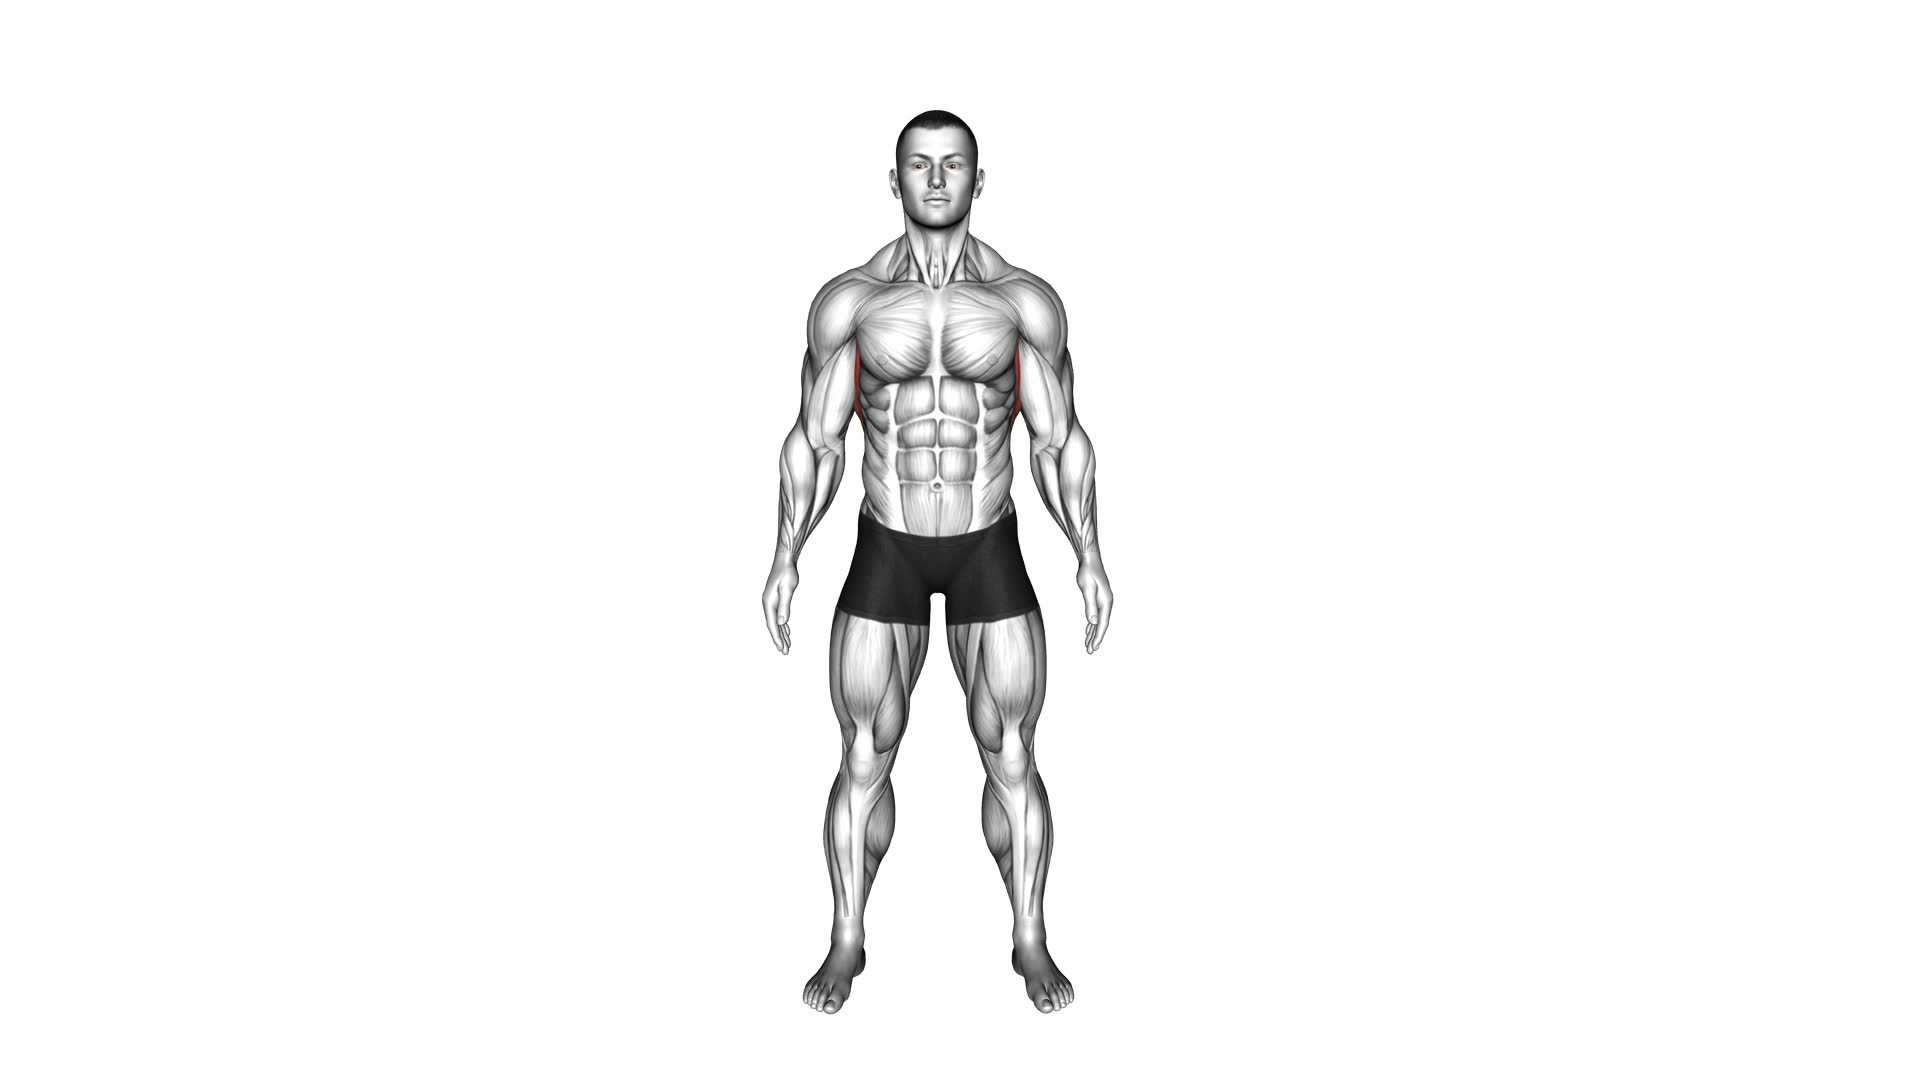 Standing Lateral Stretch - Video Exercise Guide & Tips